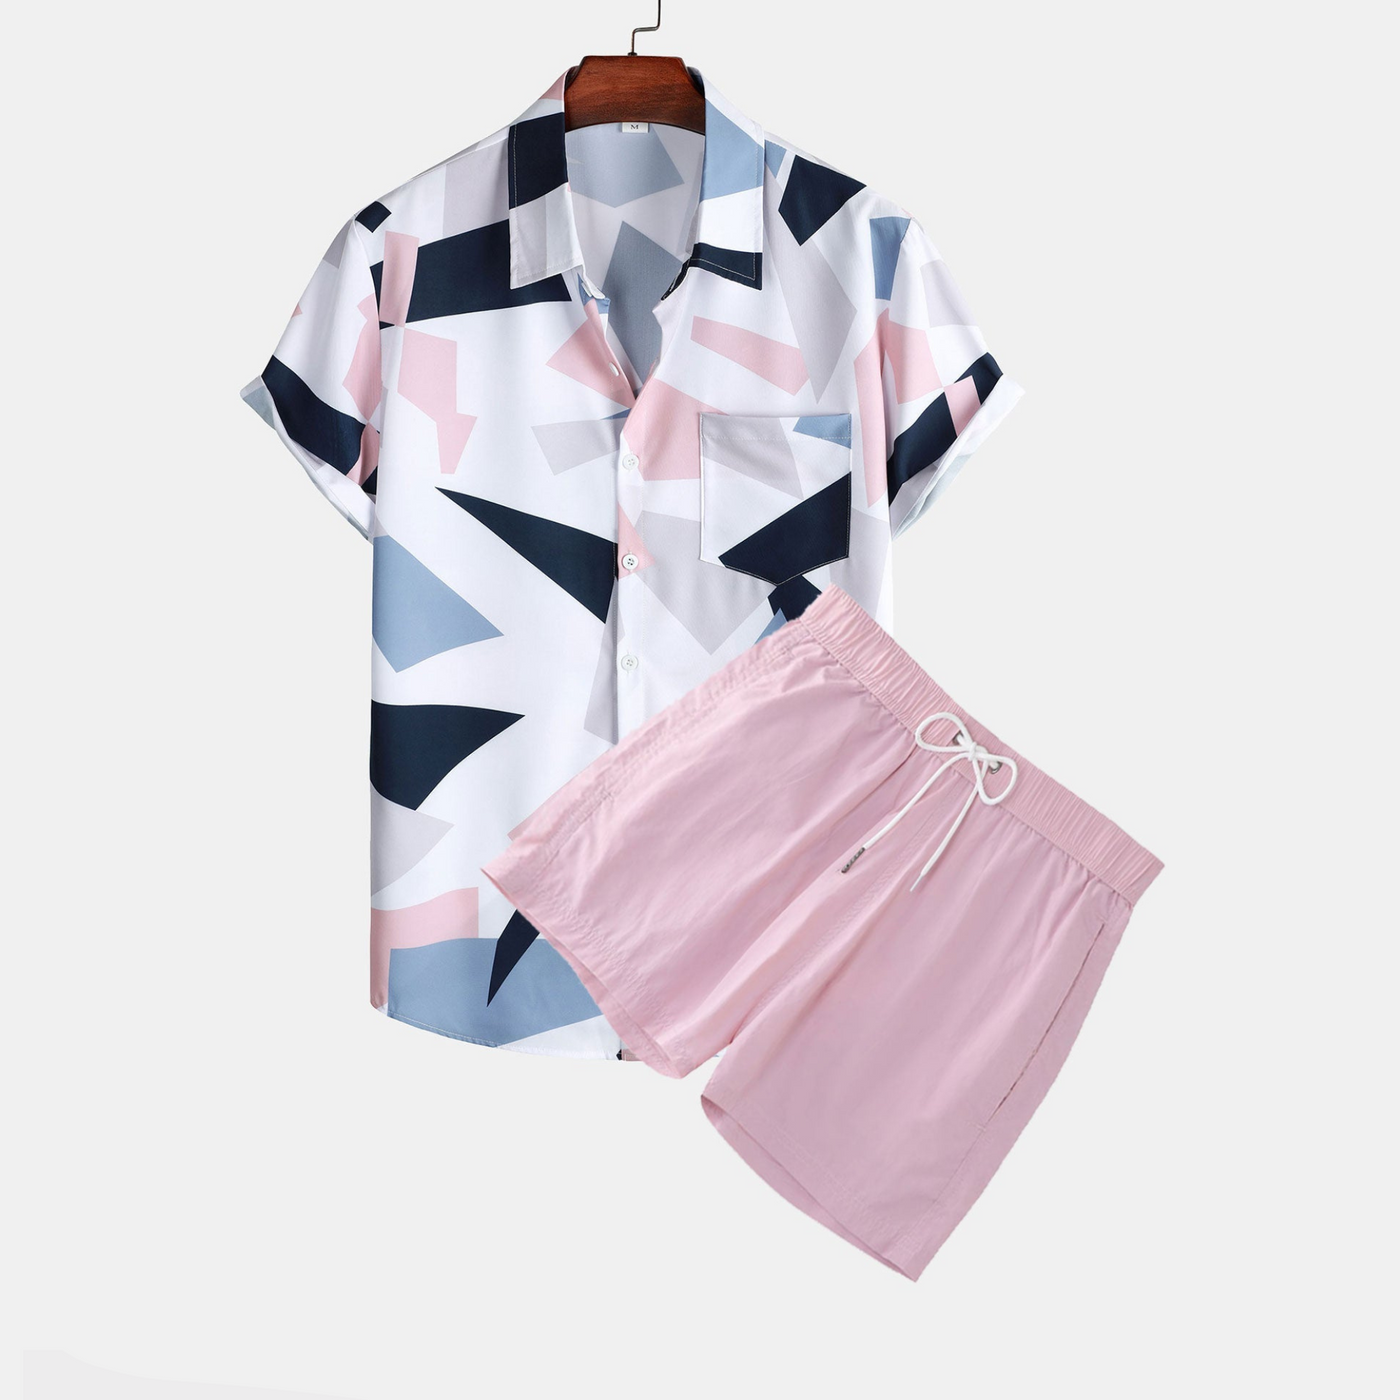 Buttoned Shirt with Geometric Print, Pocket, and Short Swim Shorts